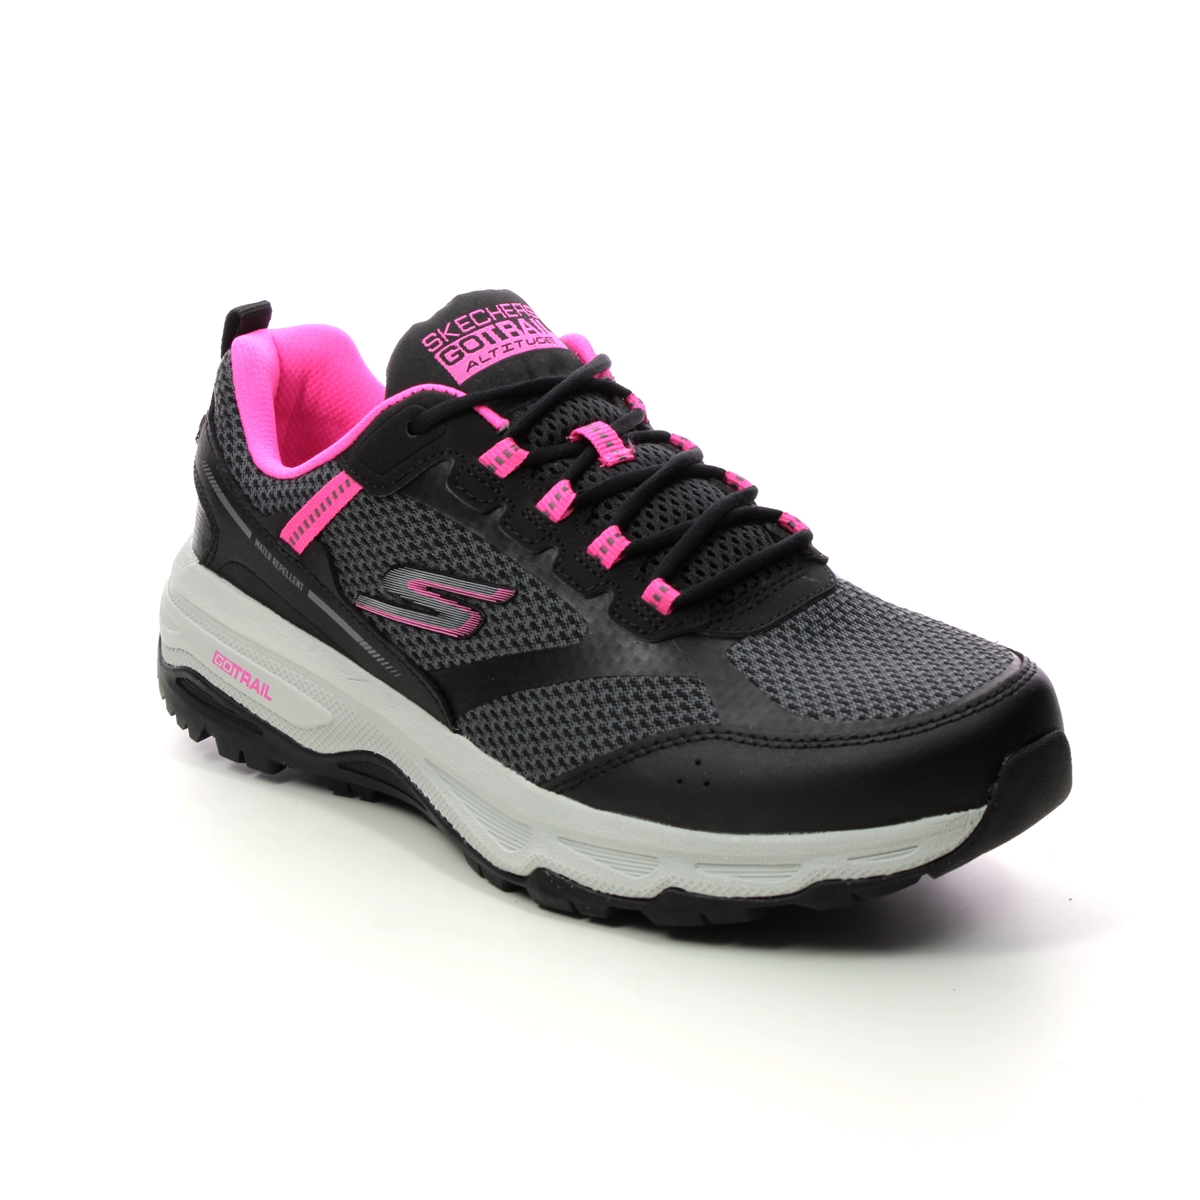 Skechers Go Run Trail Black Pink Womens Trainers 128200 In Size 3 In Plain Black Pink